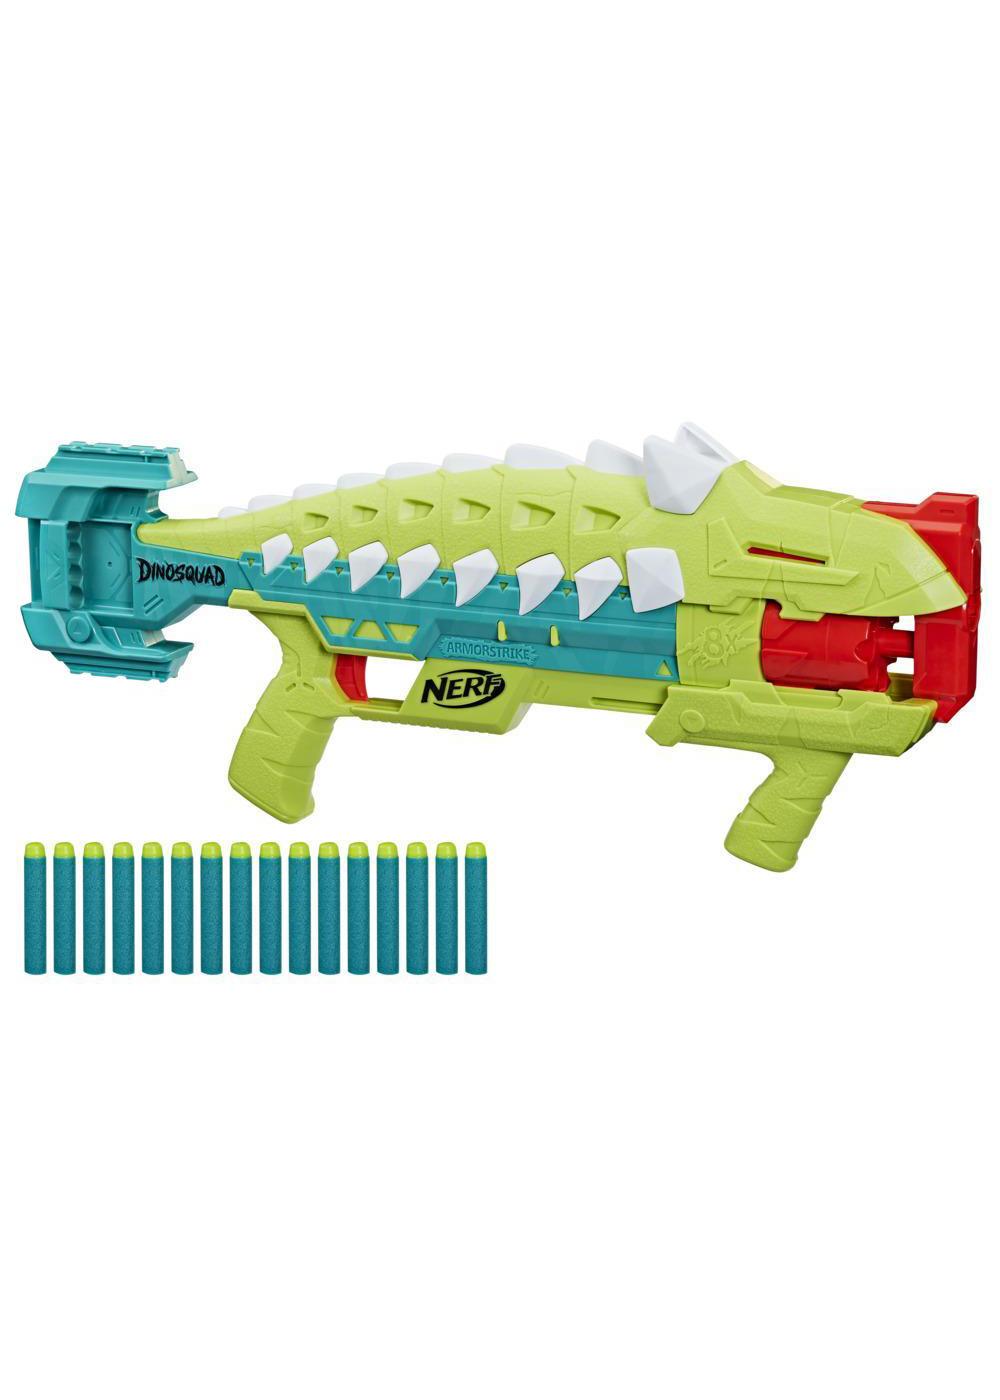 Shop Nerf Roblox Arsenal: Soul Catalyst Dart Blaster, Includes